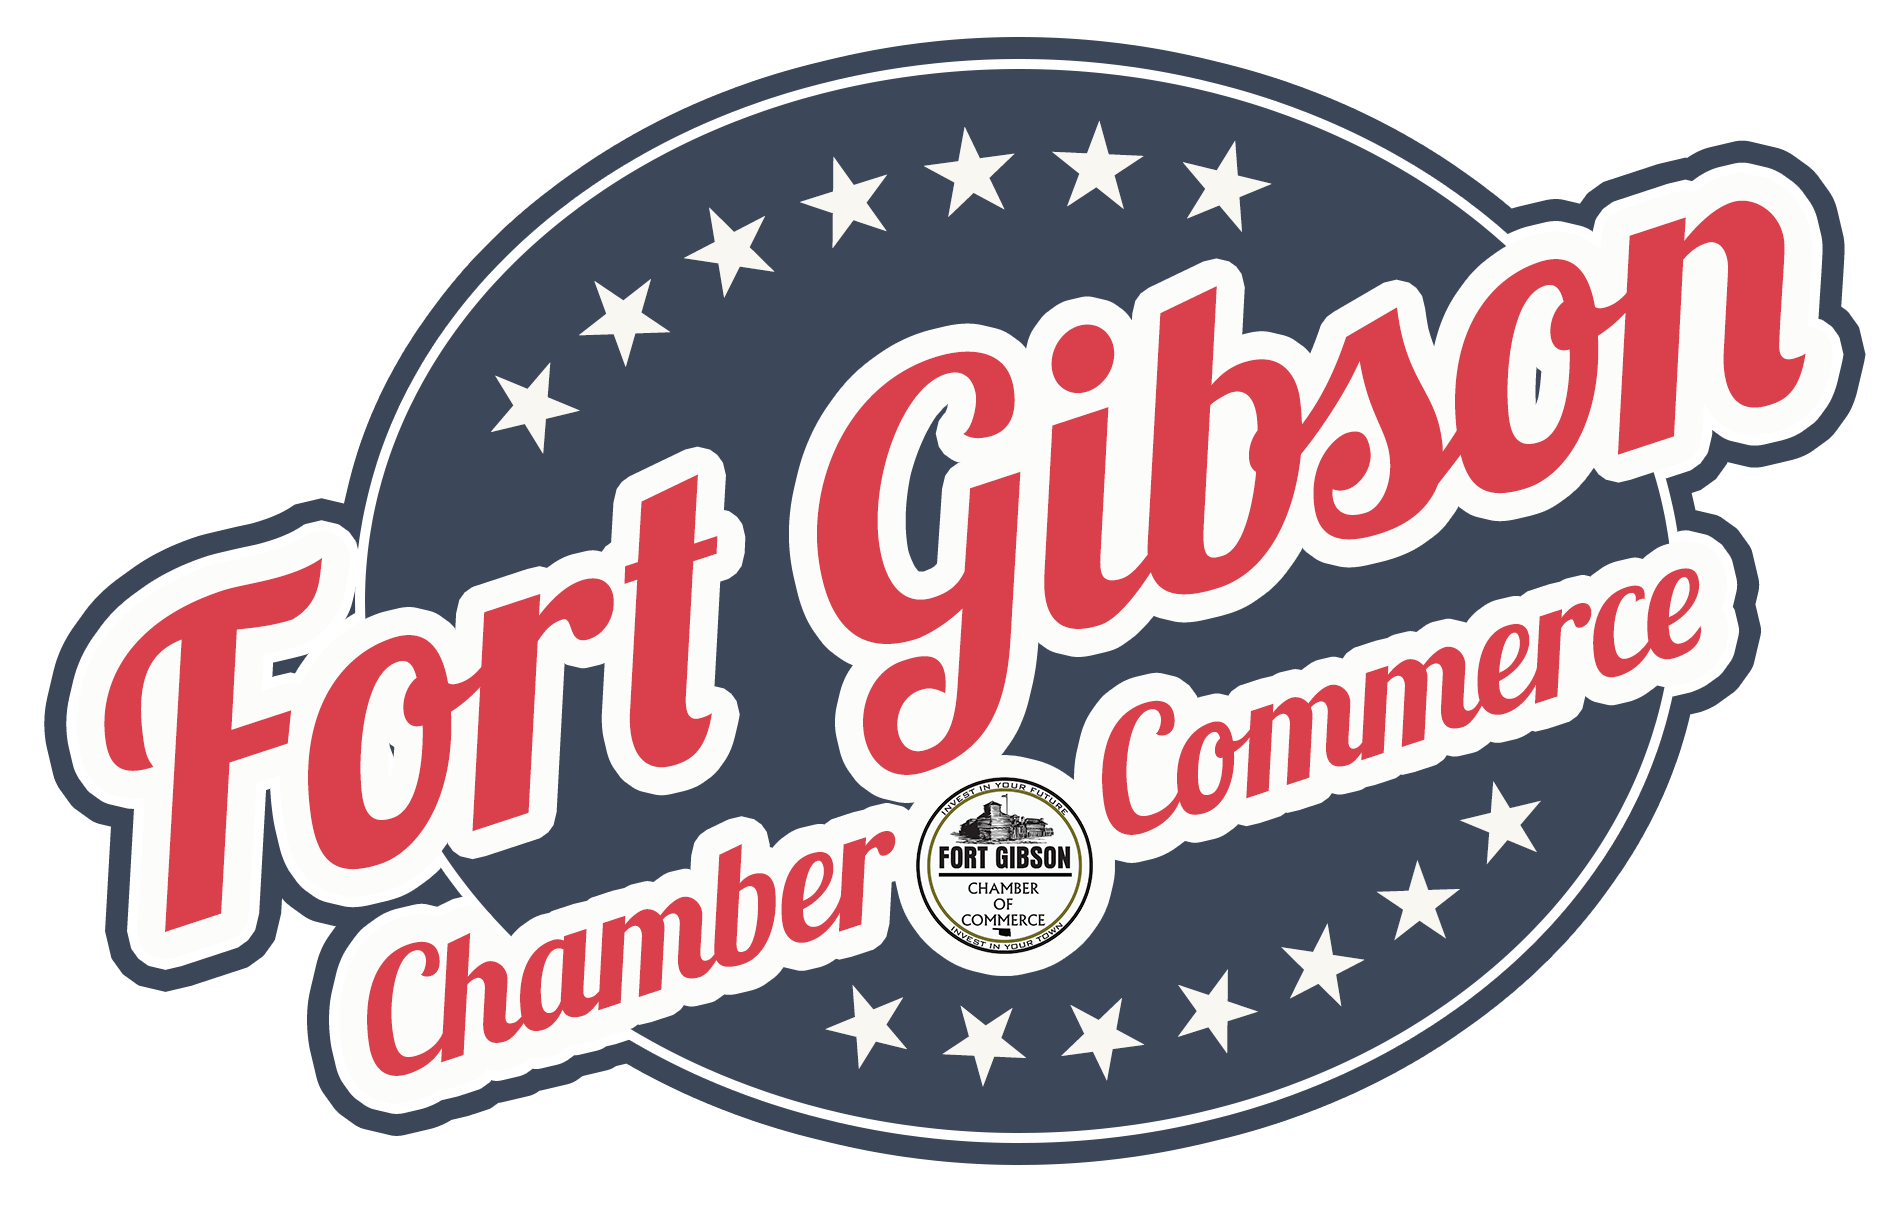 Fort Gibson Chamber of Commerce – Tourism, Visit Fort Gibson